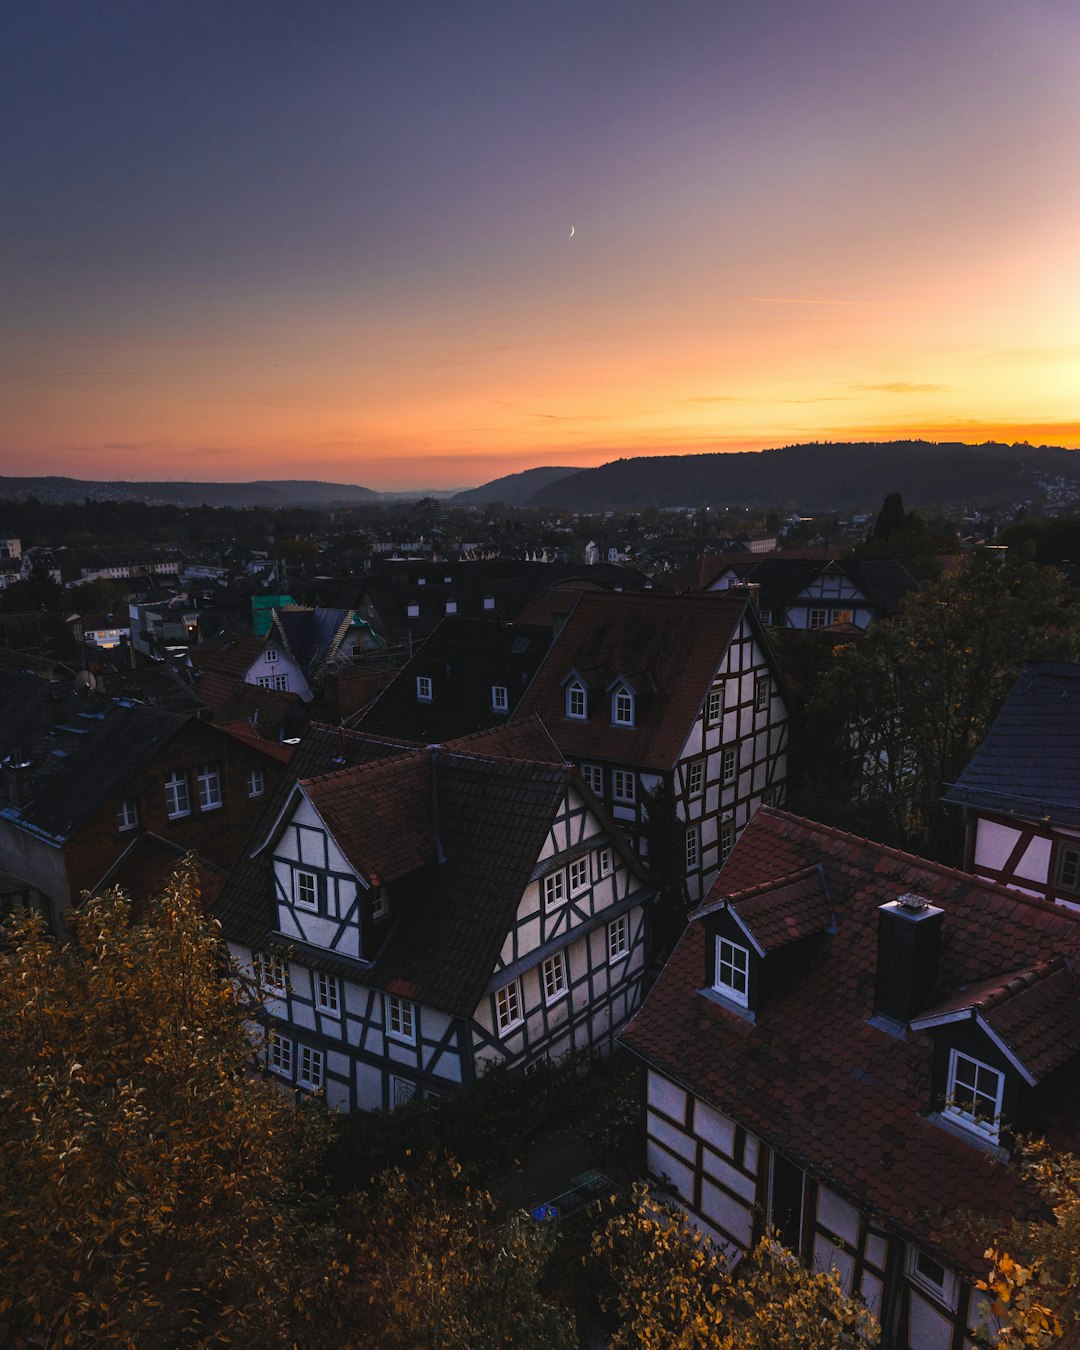 travelers stories about Town in Marburg, Germany